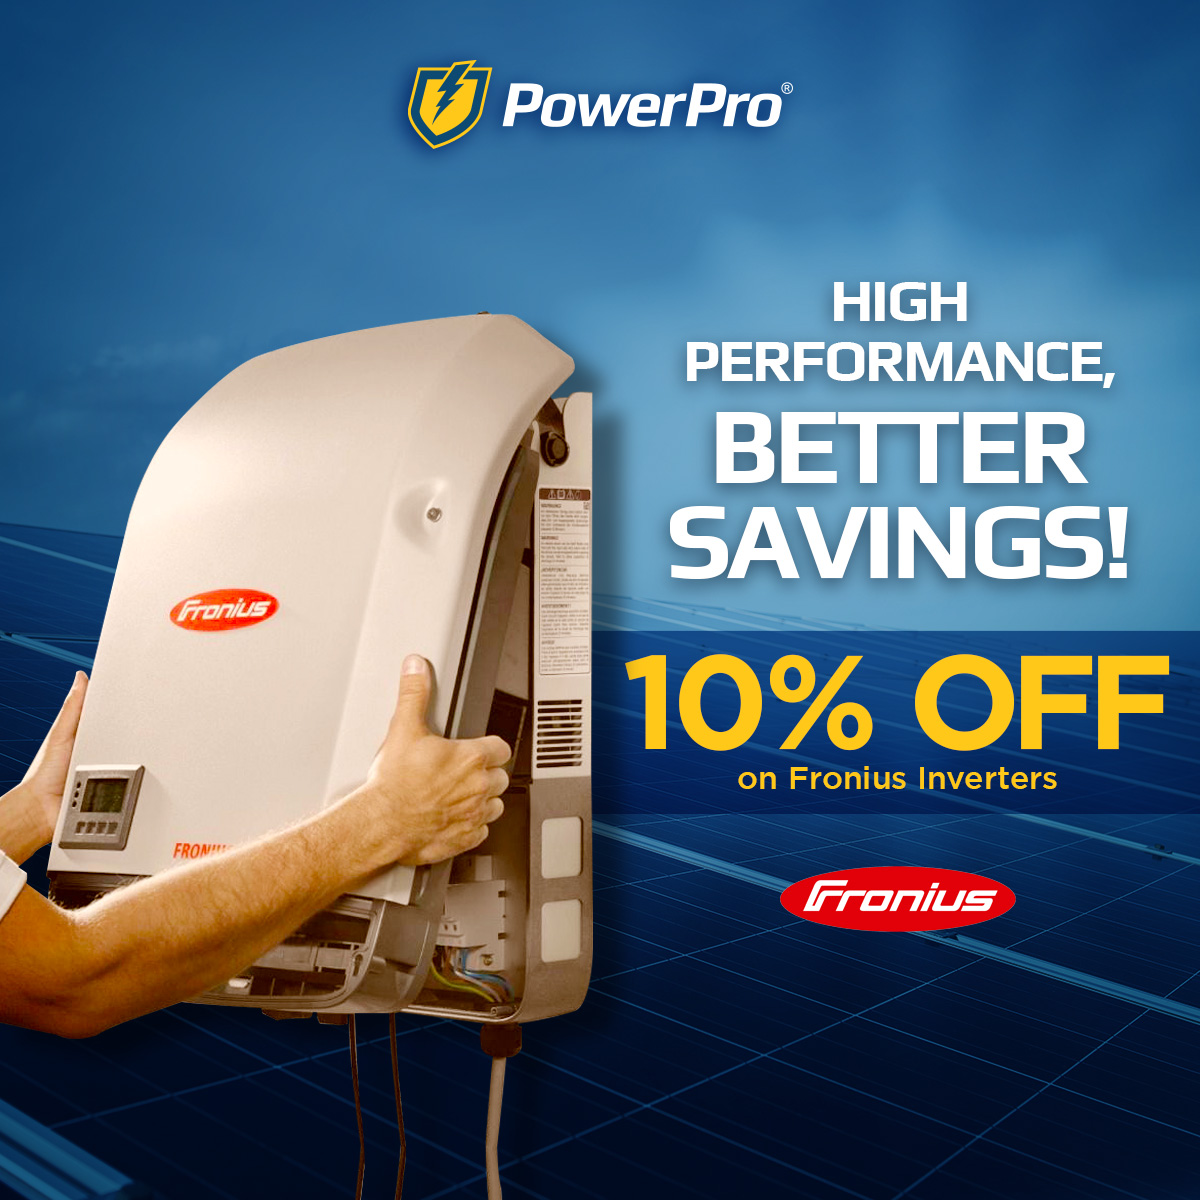 Fronius Inverters at 10% Off!